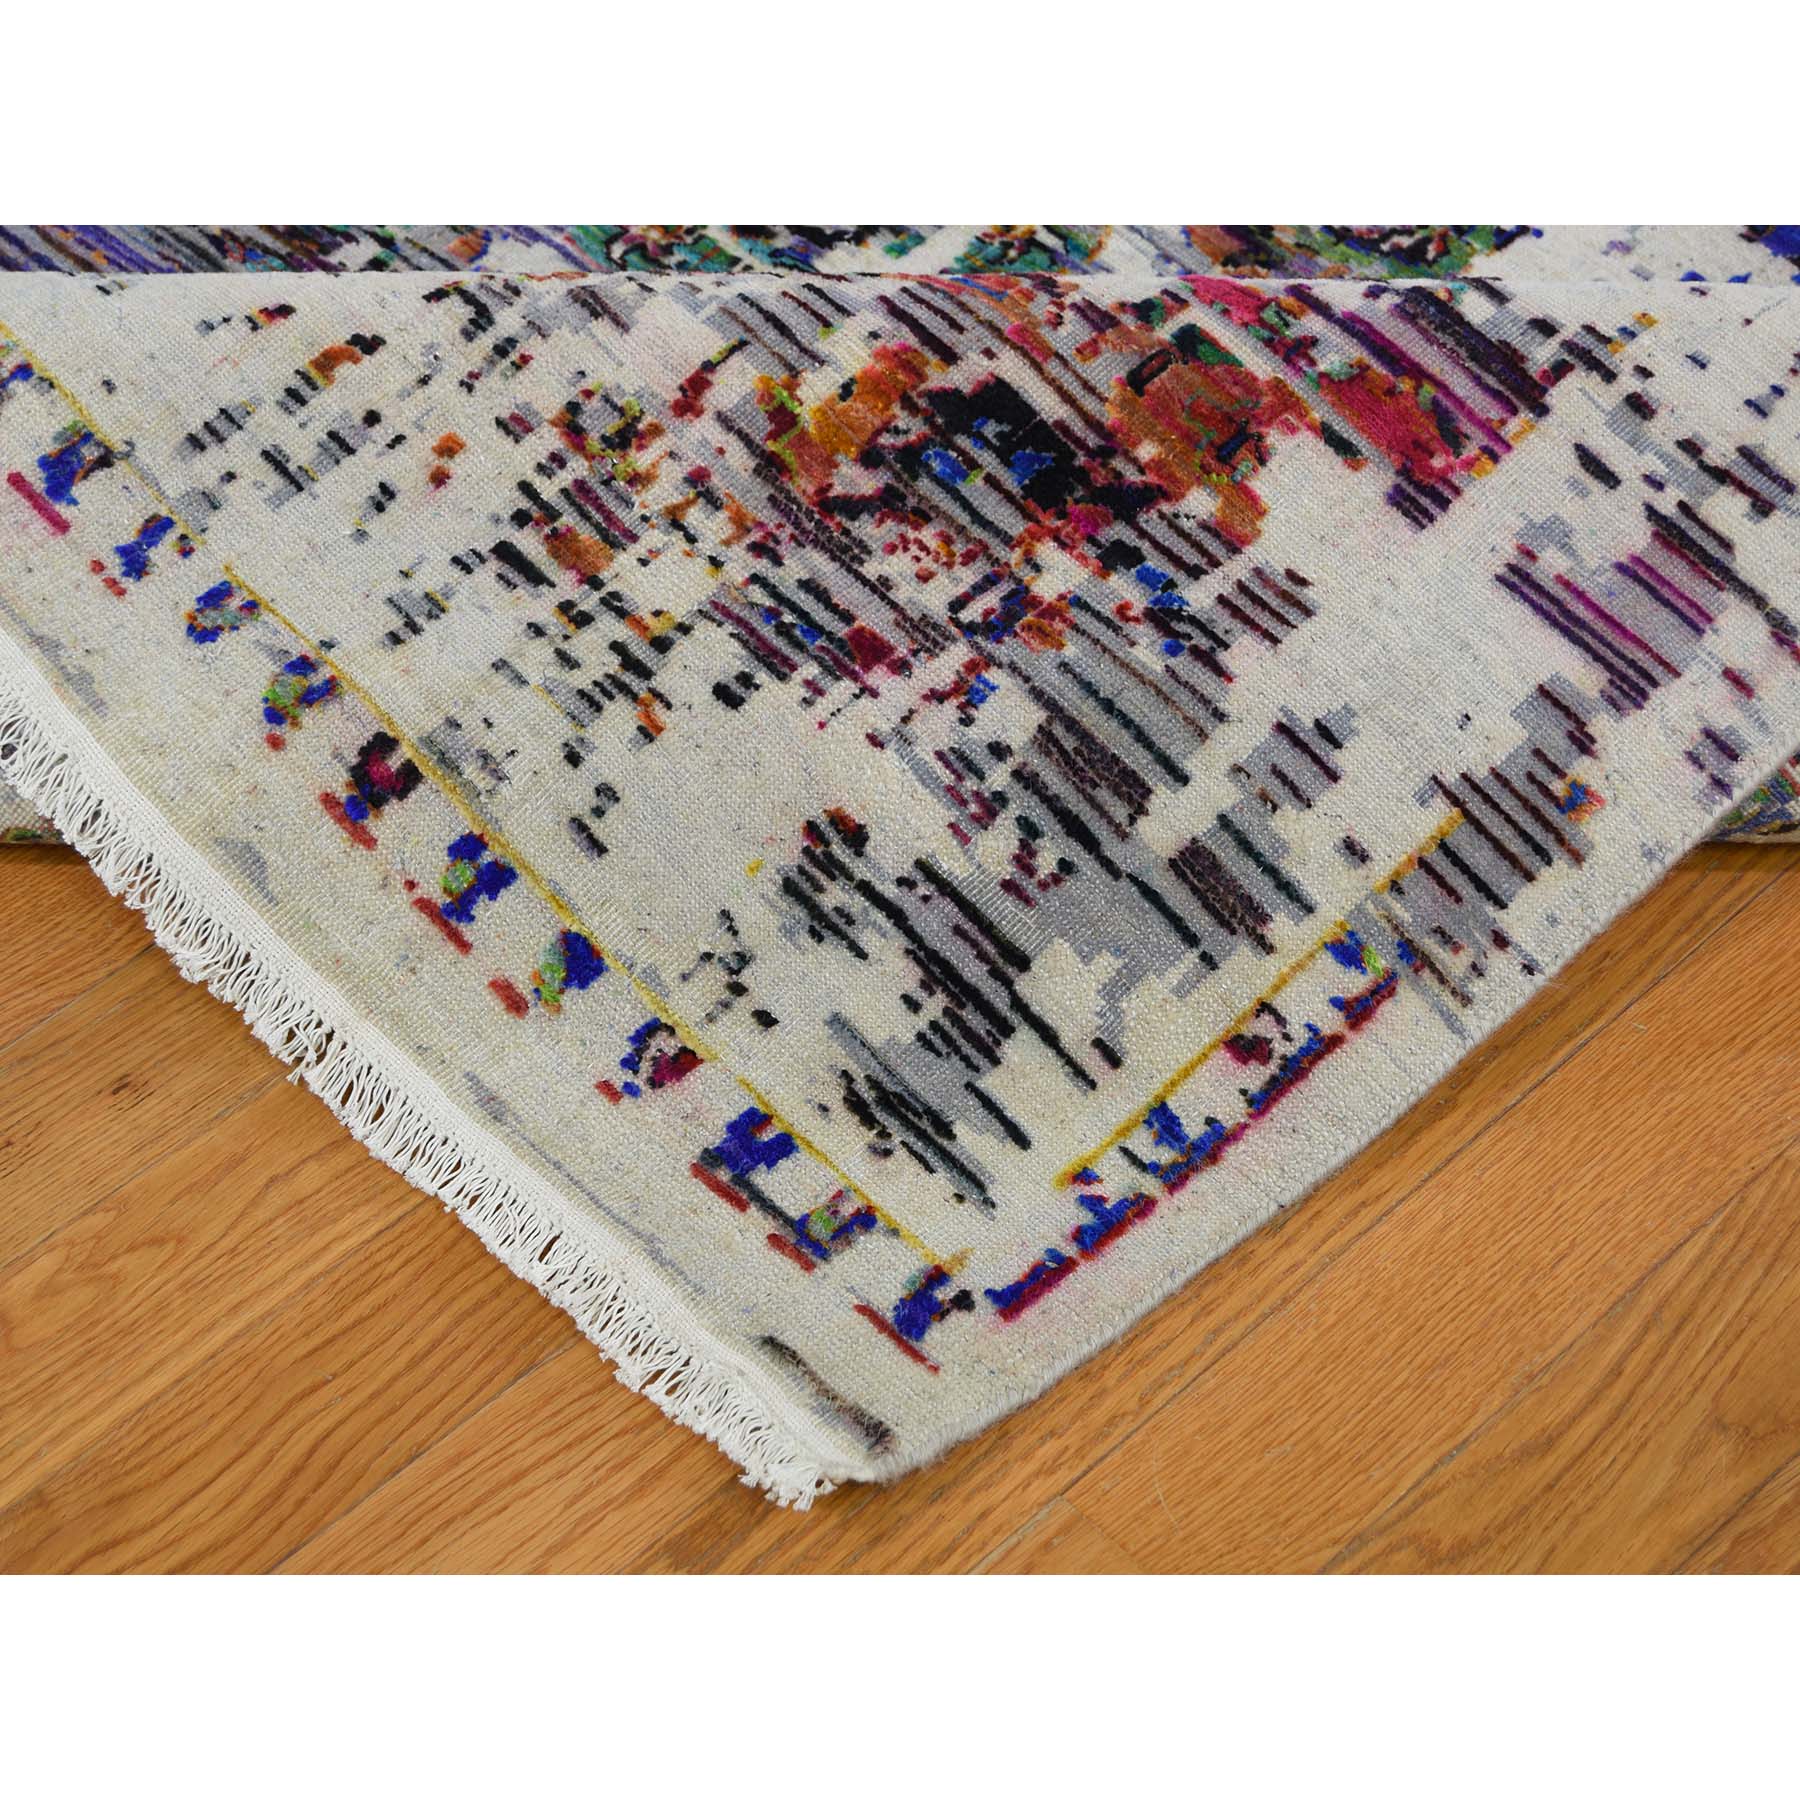 9'10"x14'3" ERASED ROSSETS, Colorful Sari Silk With Textured Wool Hand Woven Oriental Rug 